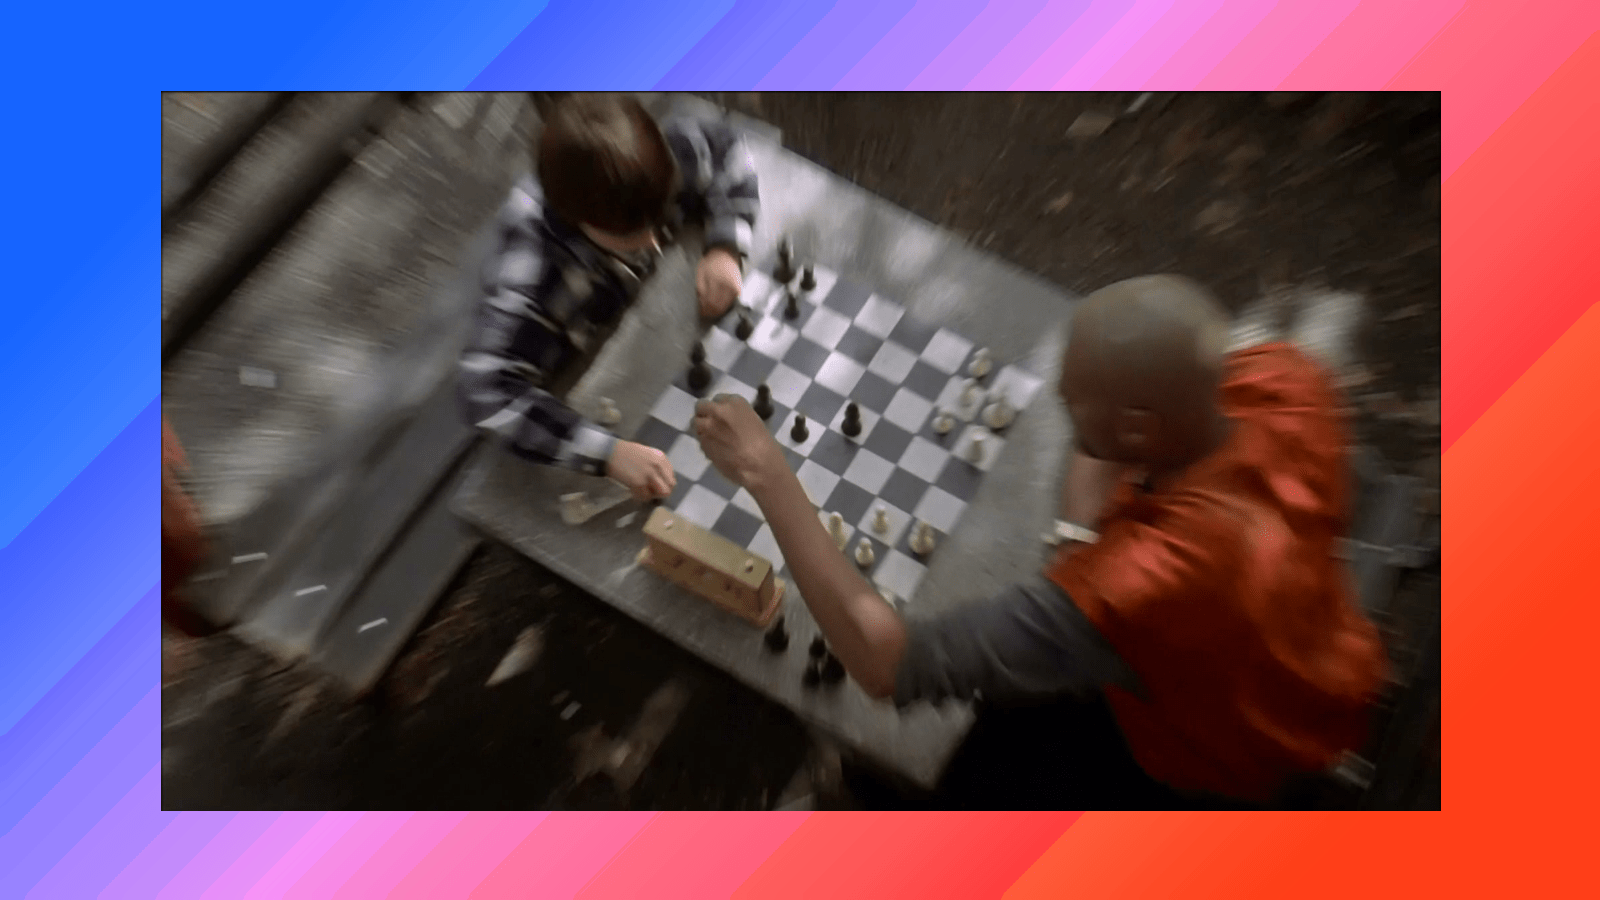 5 Amazing Chess Movies You've Probably Never Seen - Regency Chess